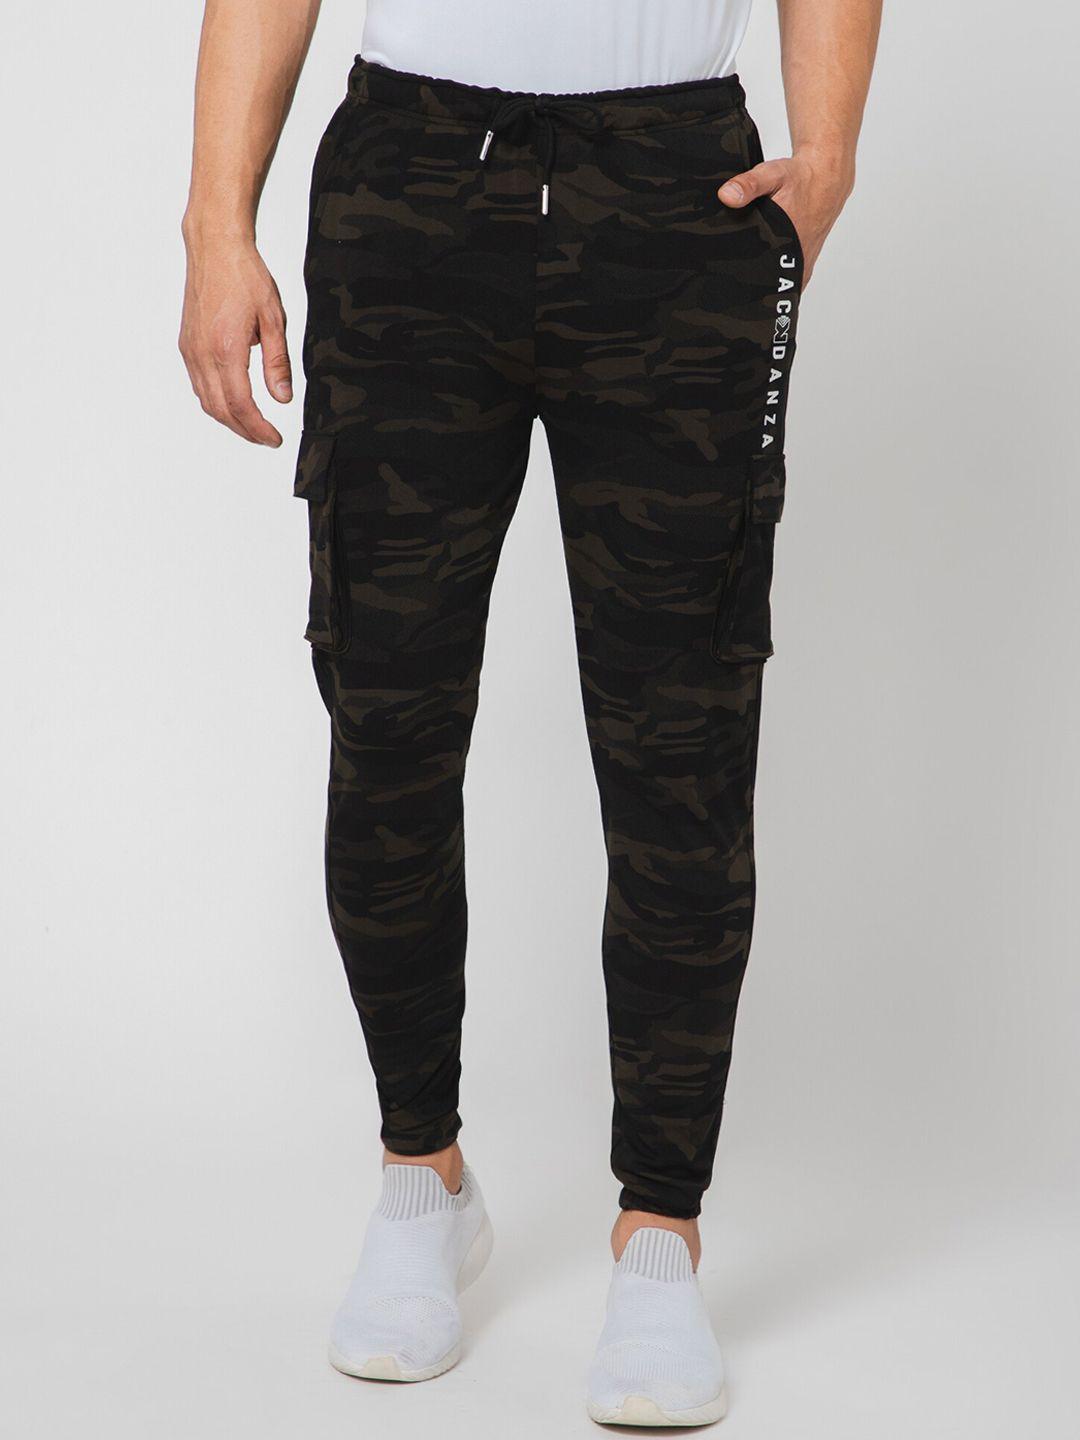 jackdanza men camouflage printed joggers